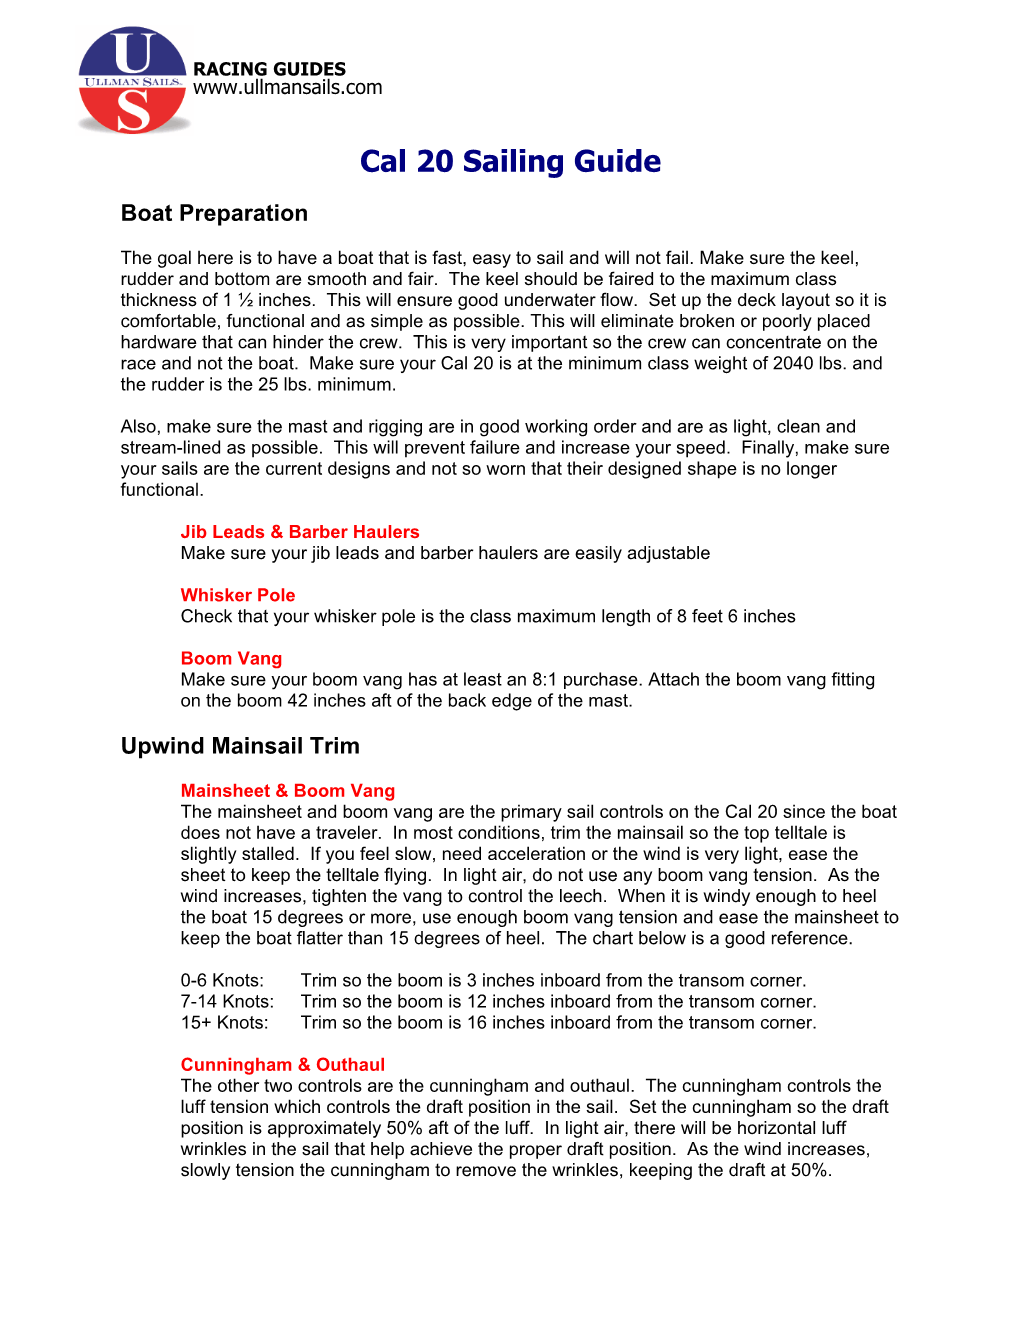 Melges 24 Tuning Guide